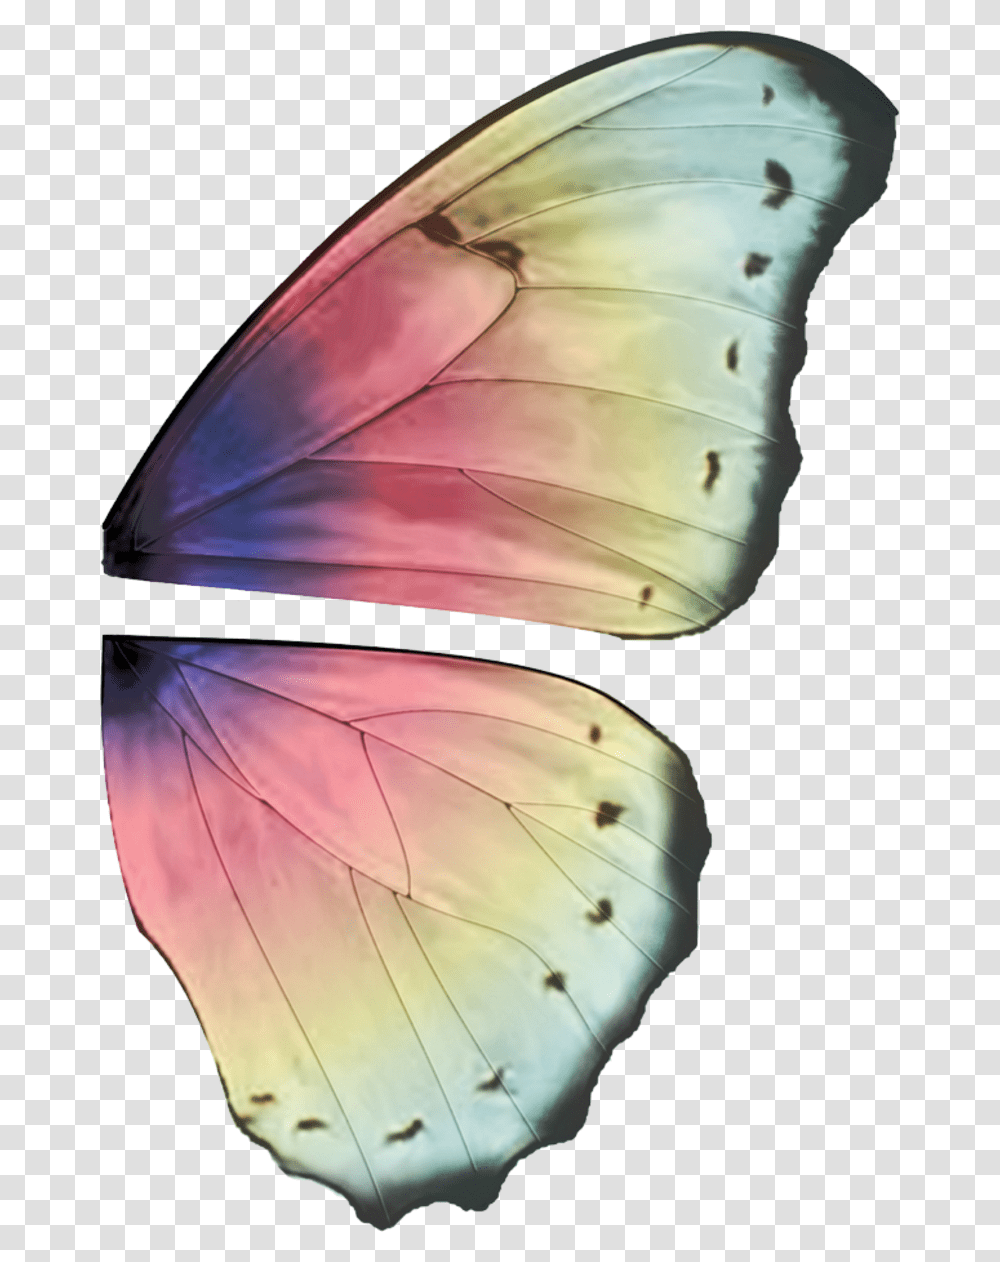 Thumb Image Butterfly Wing Design Ideas, Invertebrate, Animal, Insect, Sunglasses Transparent Png